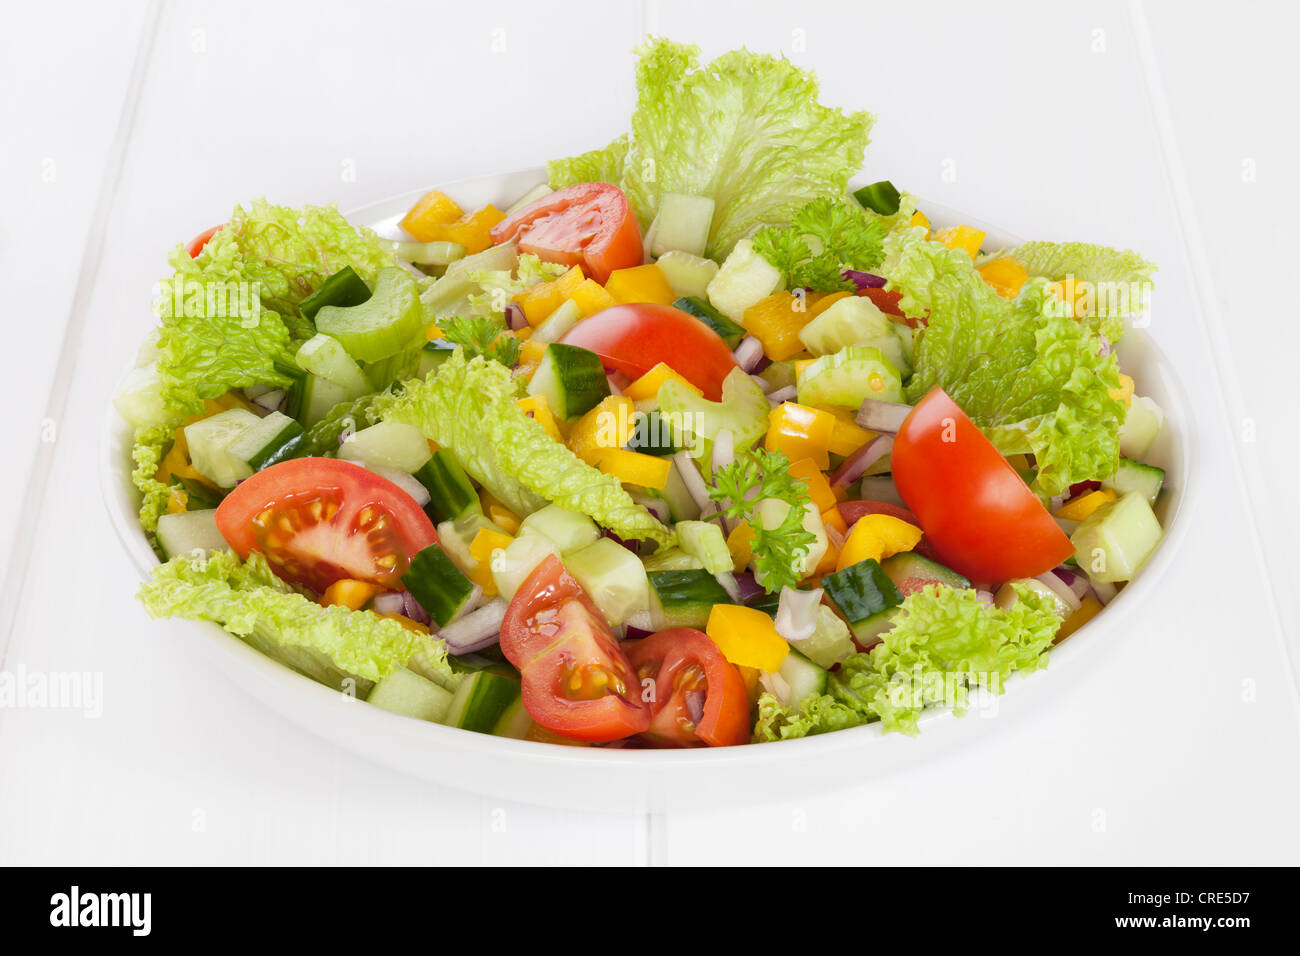 A bowl of fresh mixed salad, with lettuce, cucumber, tomato, red onion, yellow capsicum,celery, parsley. Stock Photo